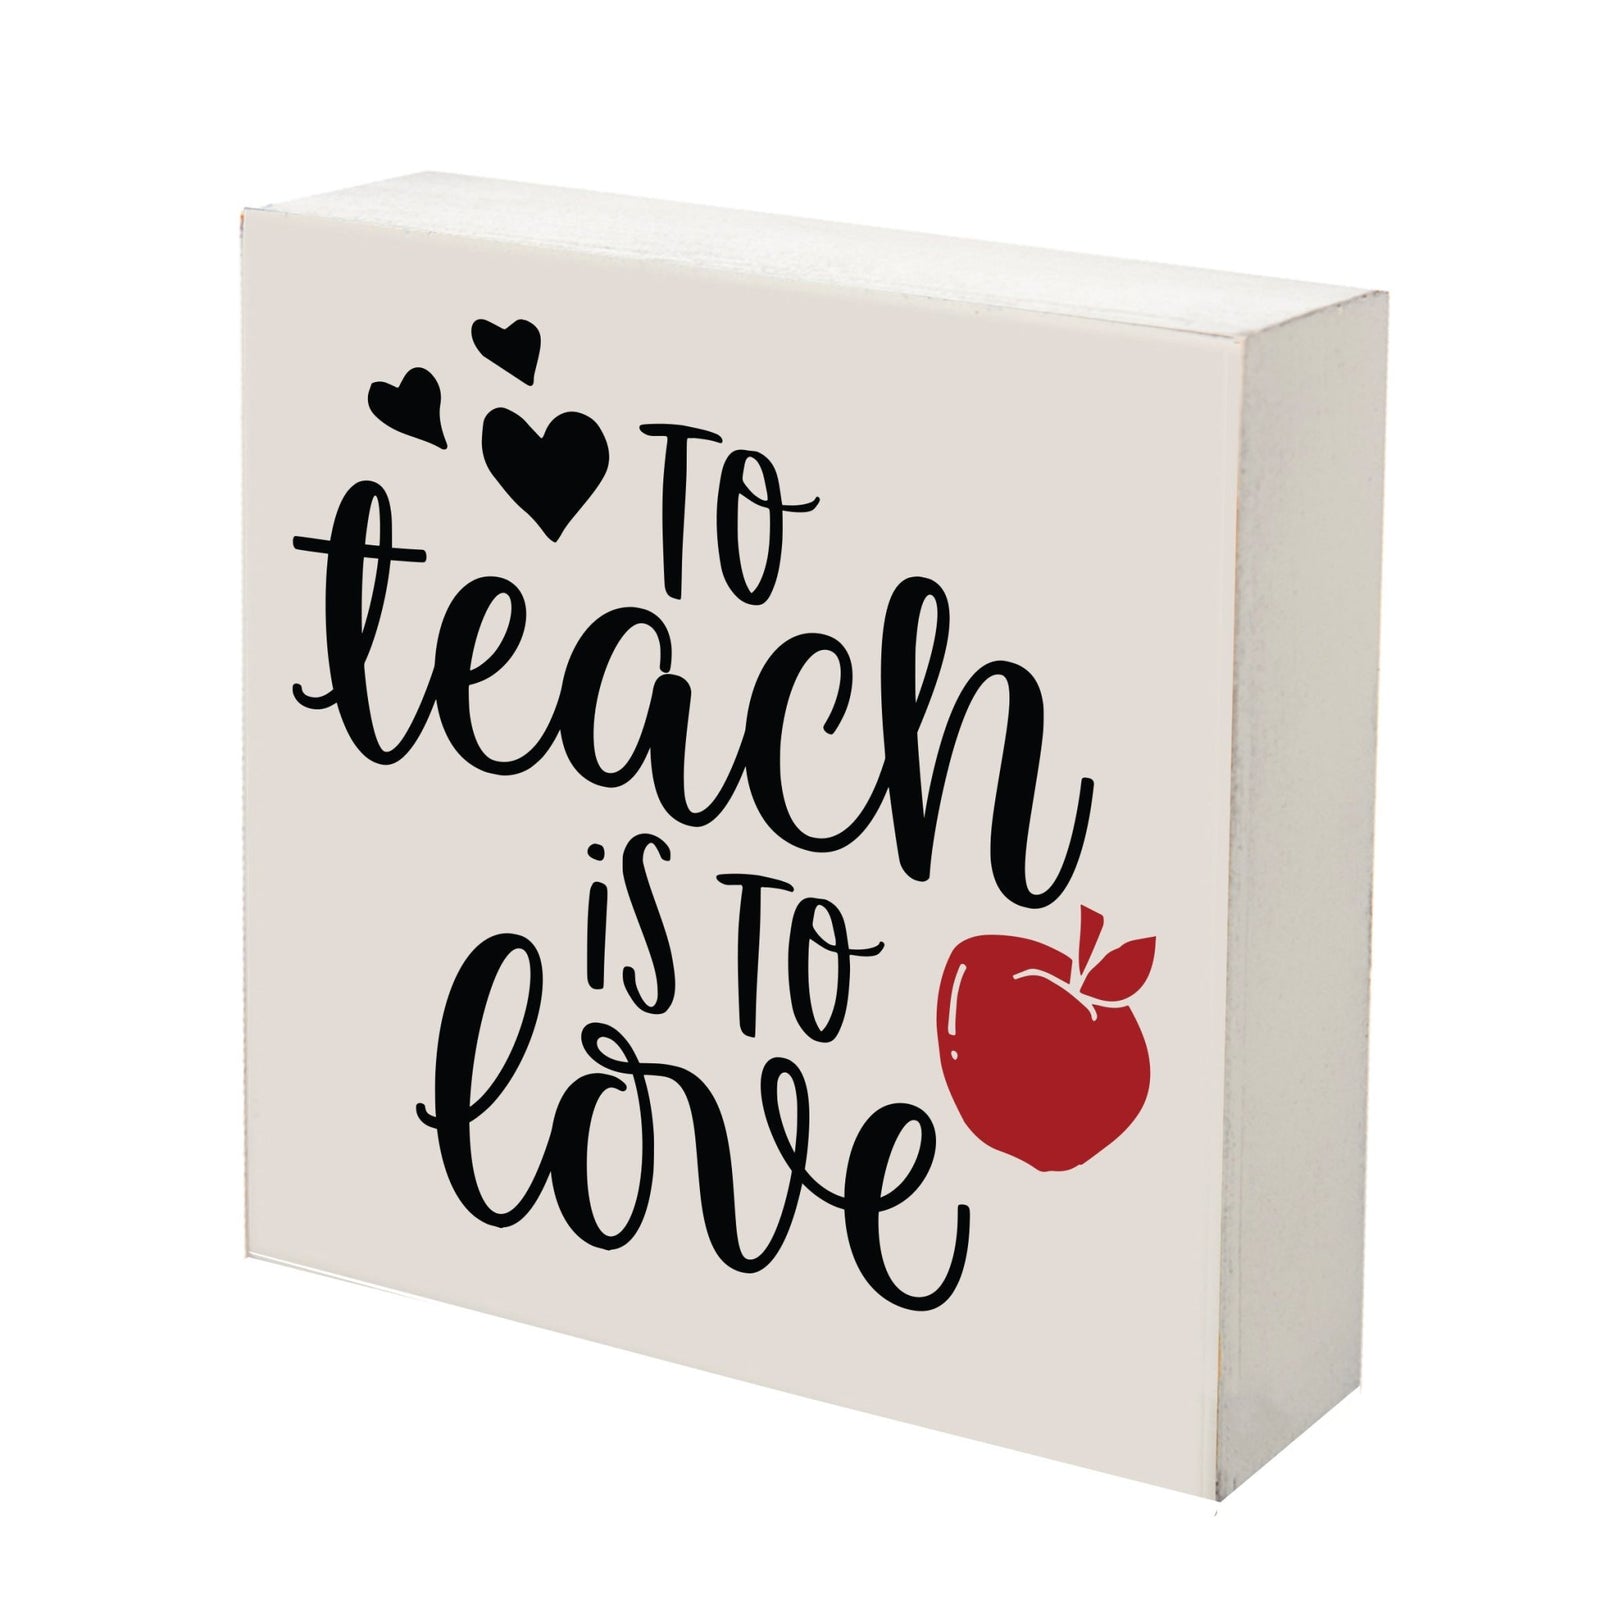 Inspiring Modern Framed Shadow Box 10x10 To Teach Is To (Red Apple) - LifeSong Milestones